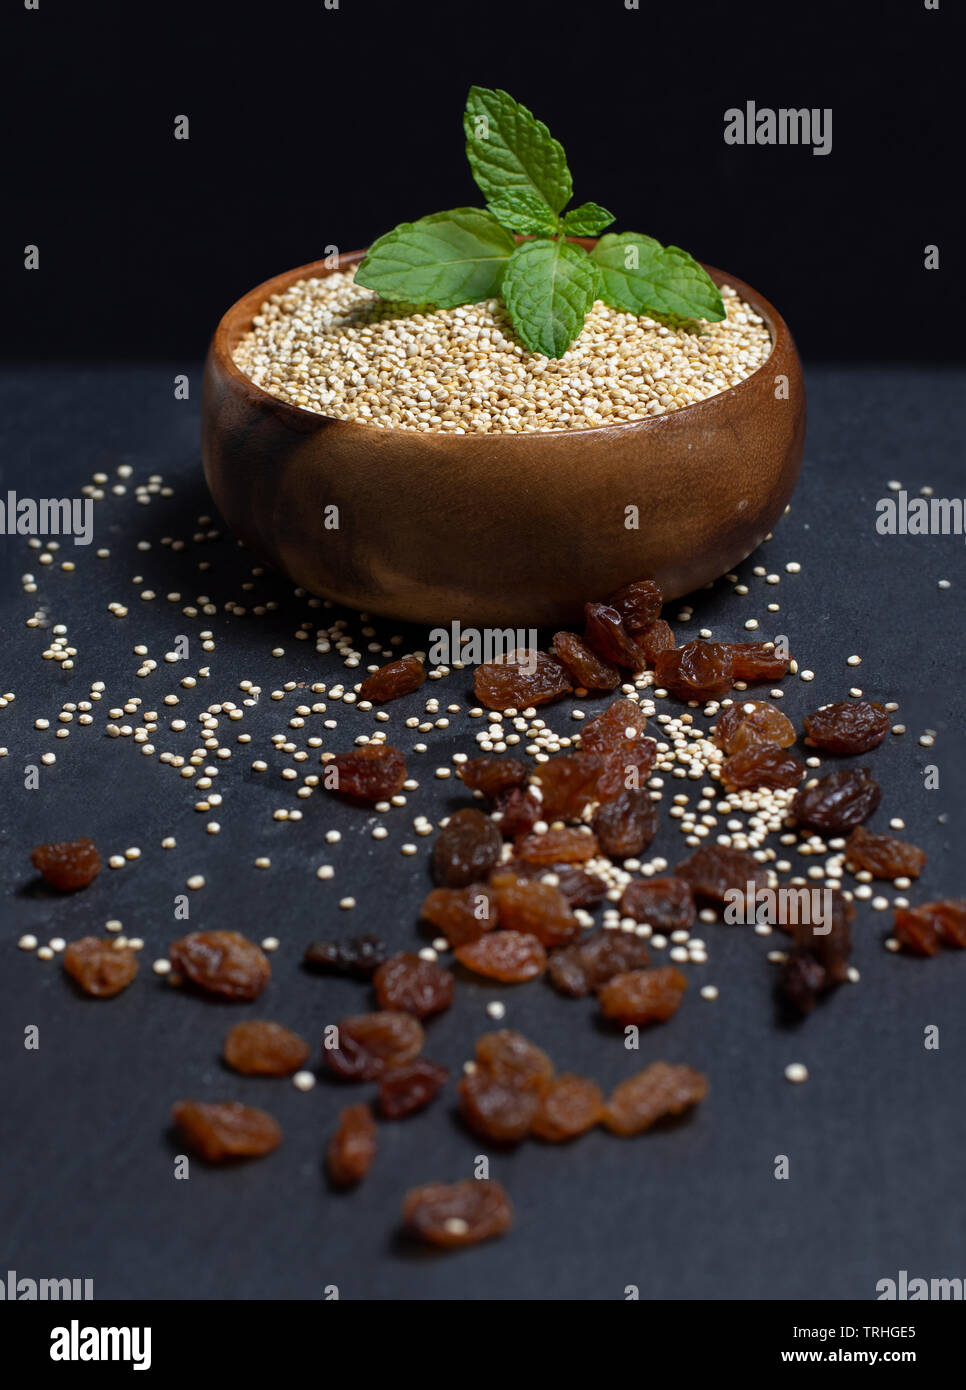 wooden bowl filled with quinoa on black background Stock Photo